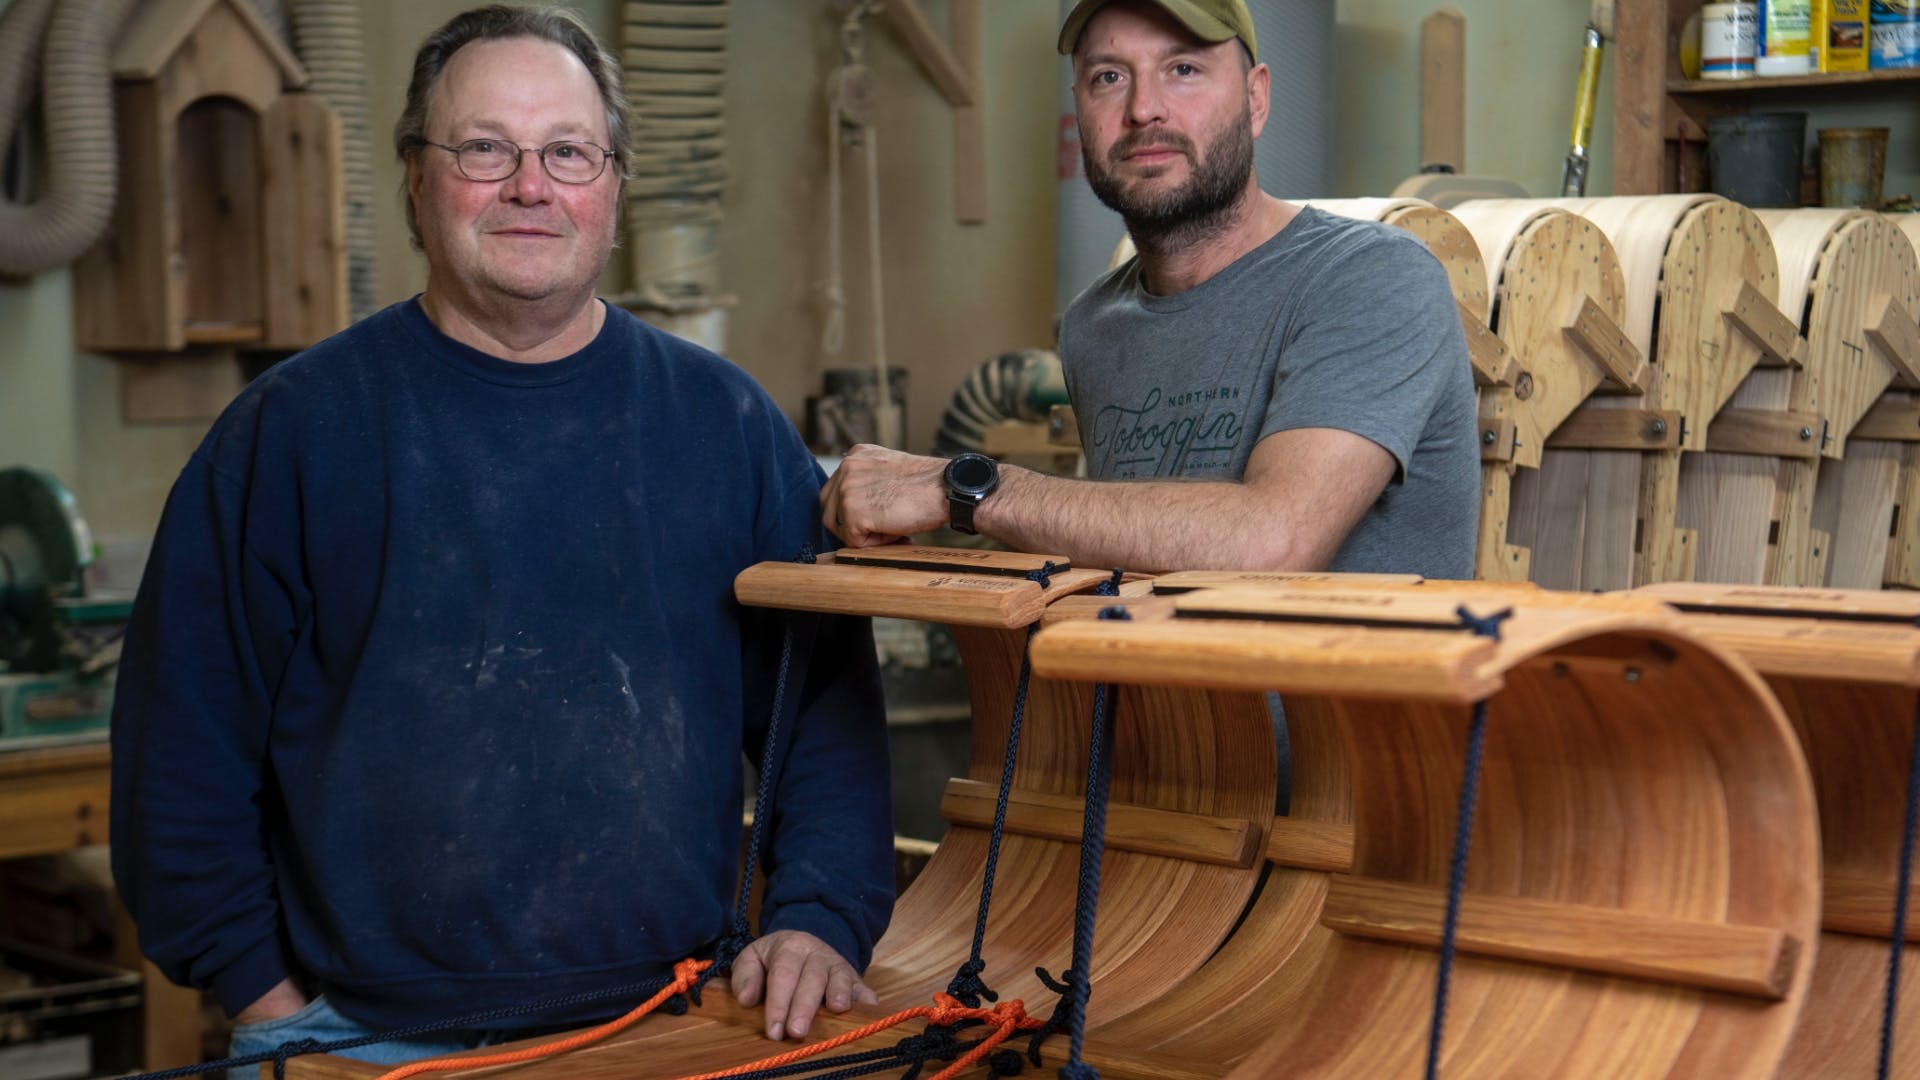 Father and son John and Jackson Harren pose with completed toboggans at their workshop in Minnesota.